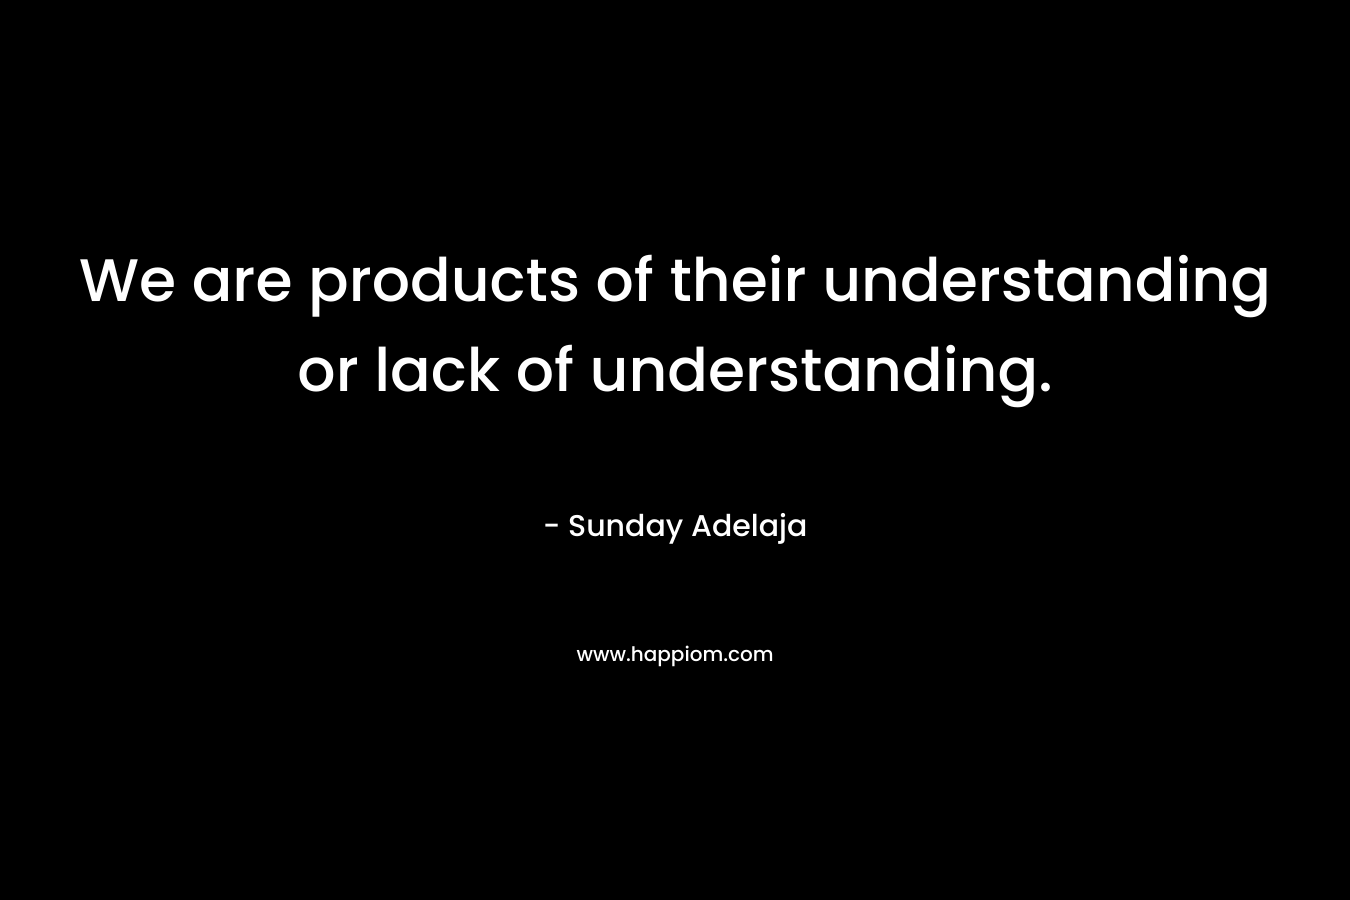 We are products of their understanding or lack of understanding.